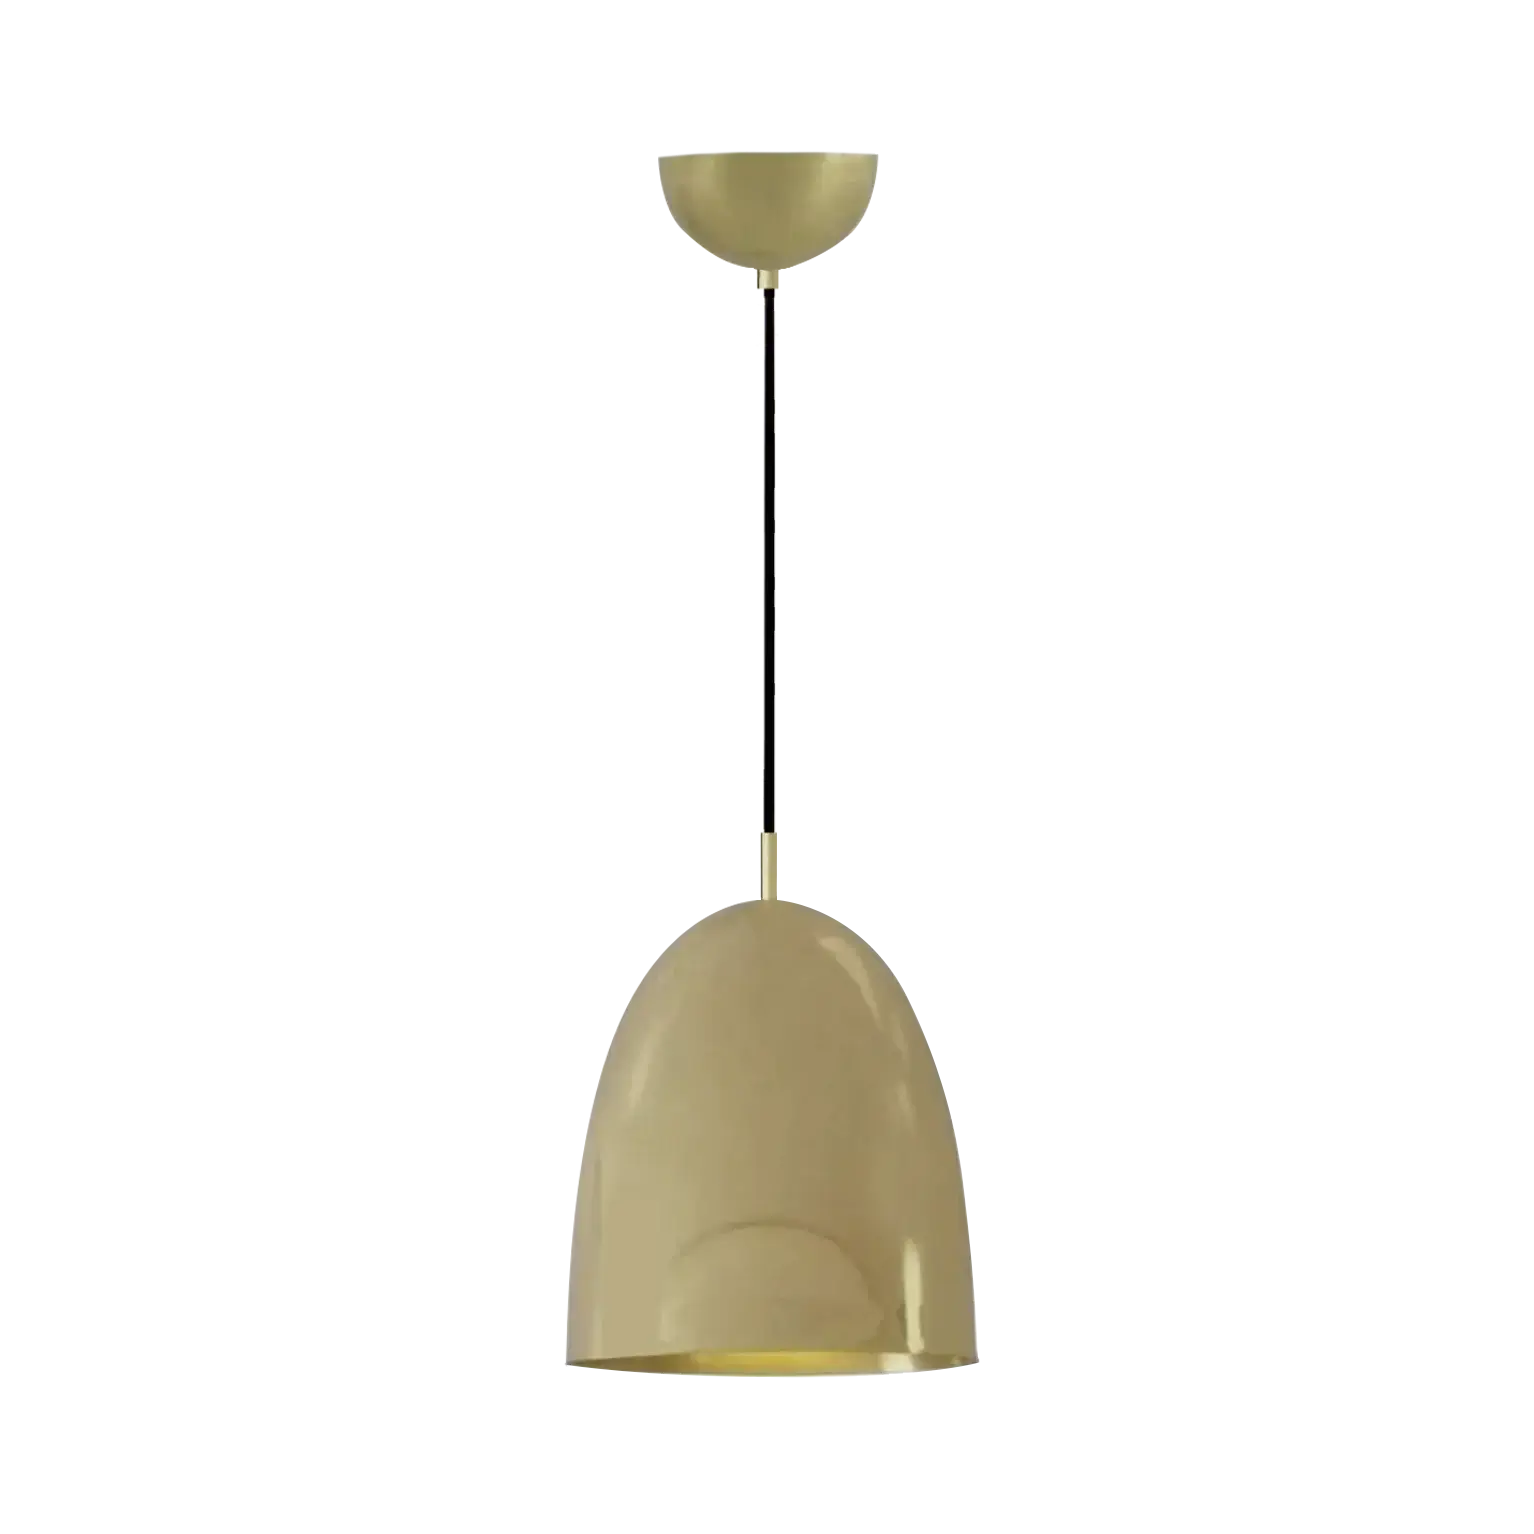 Dounia home Pendant light in antique brass  made of Metal, Model: Roya  dome